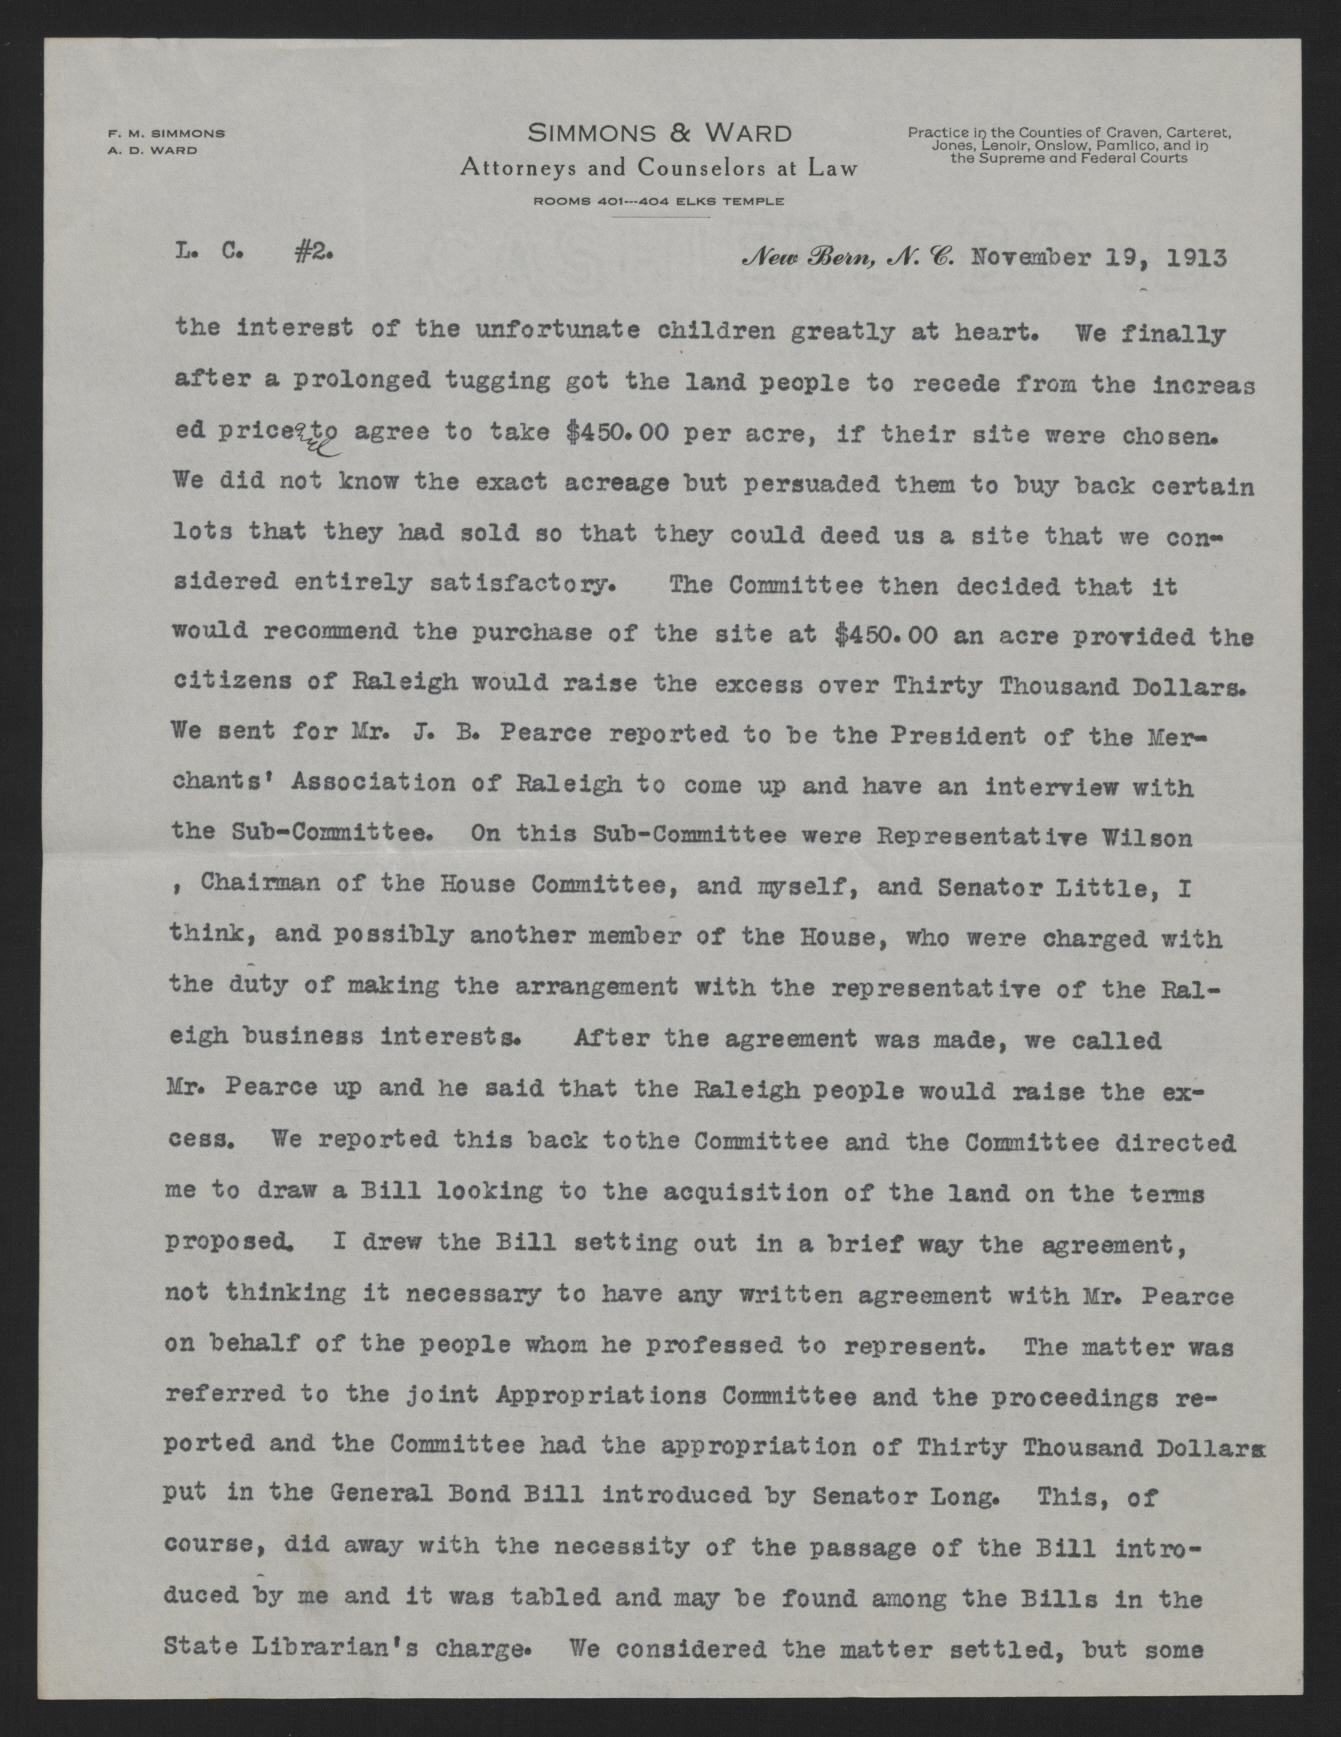 Letter from Ward to Craig, November 19, 1913, page 2